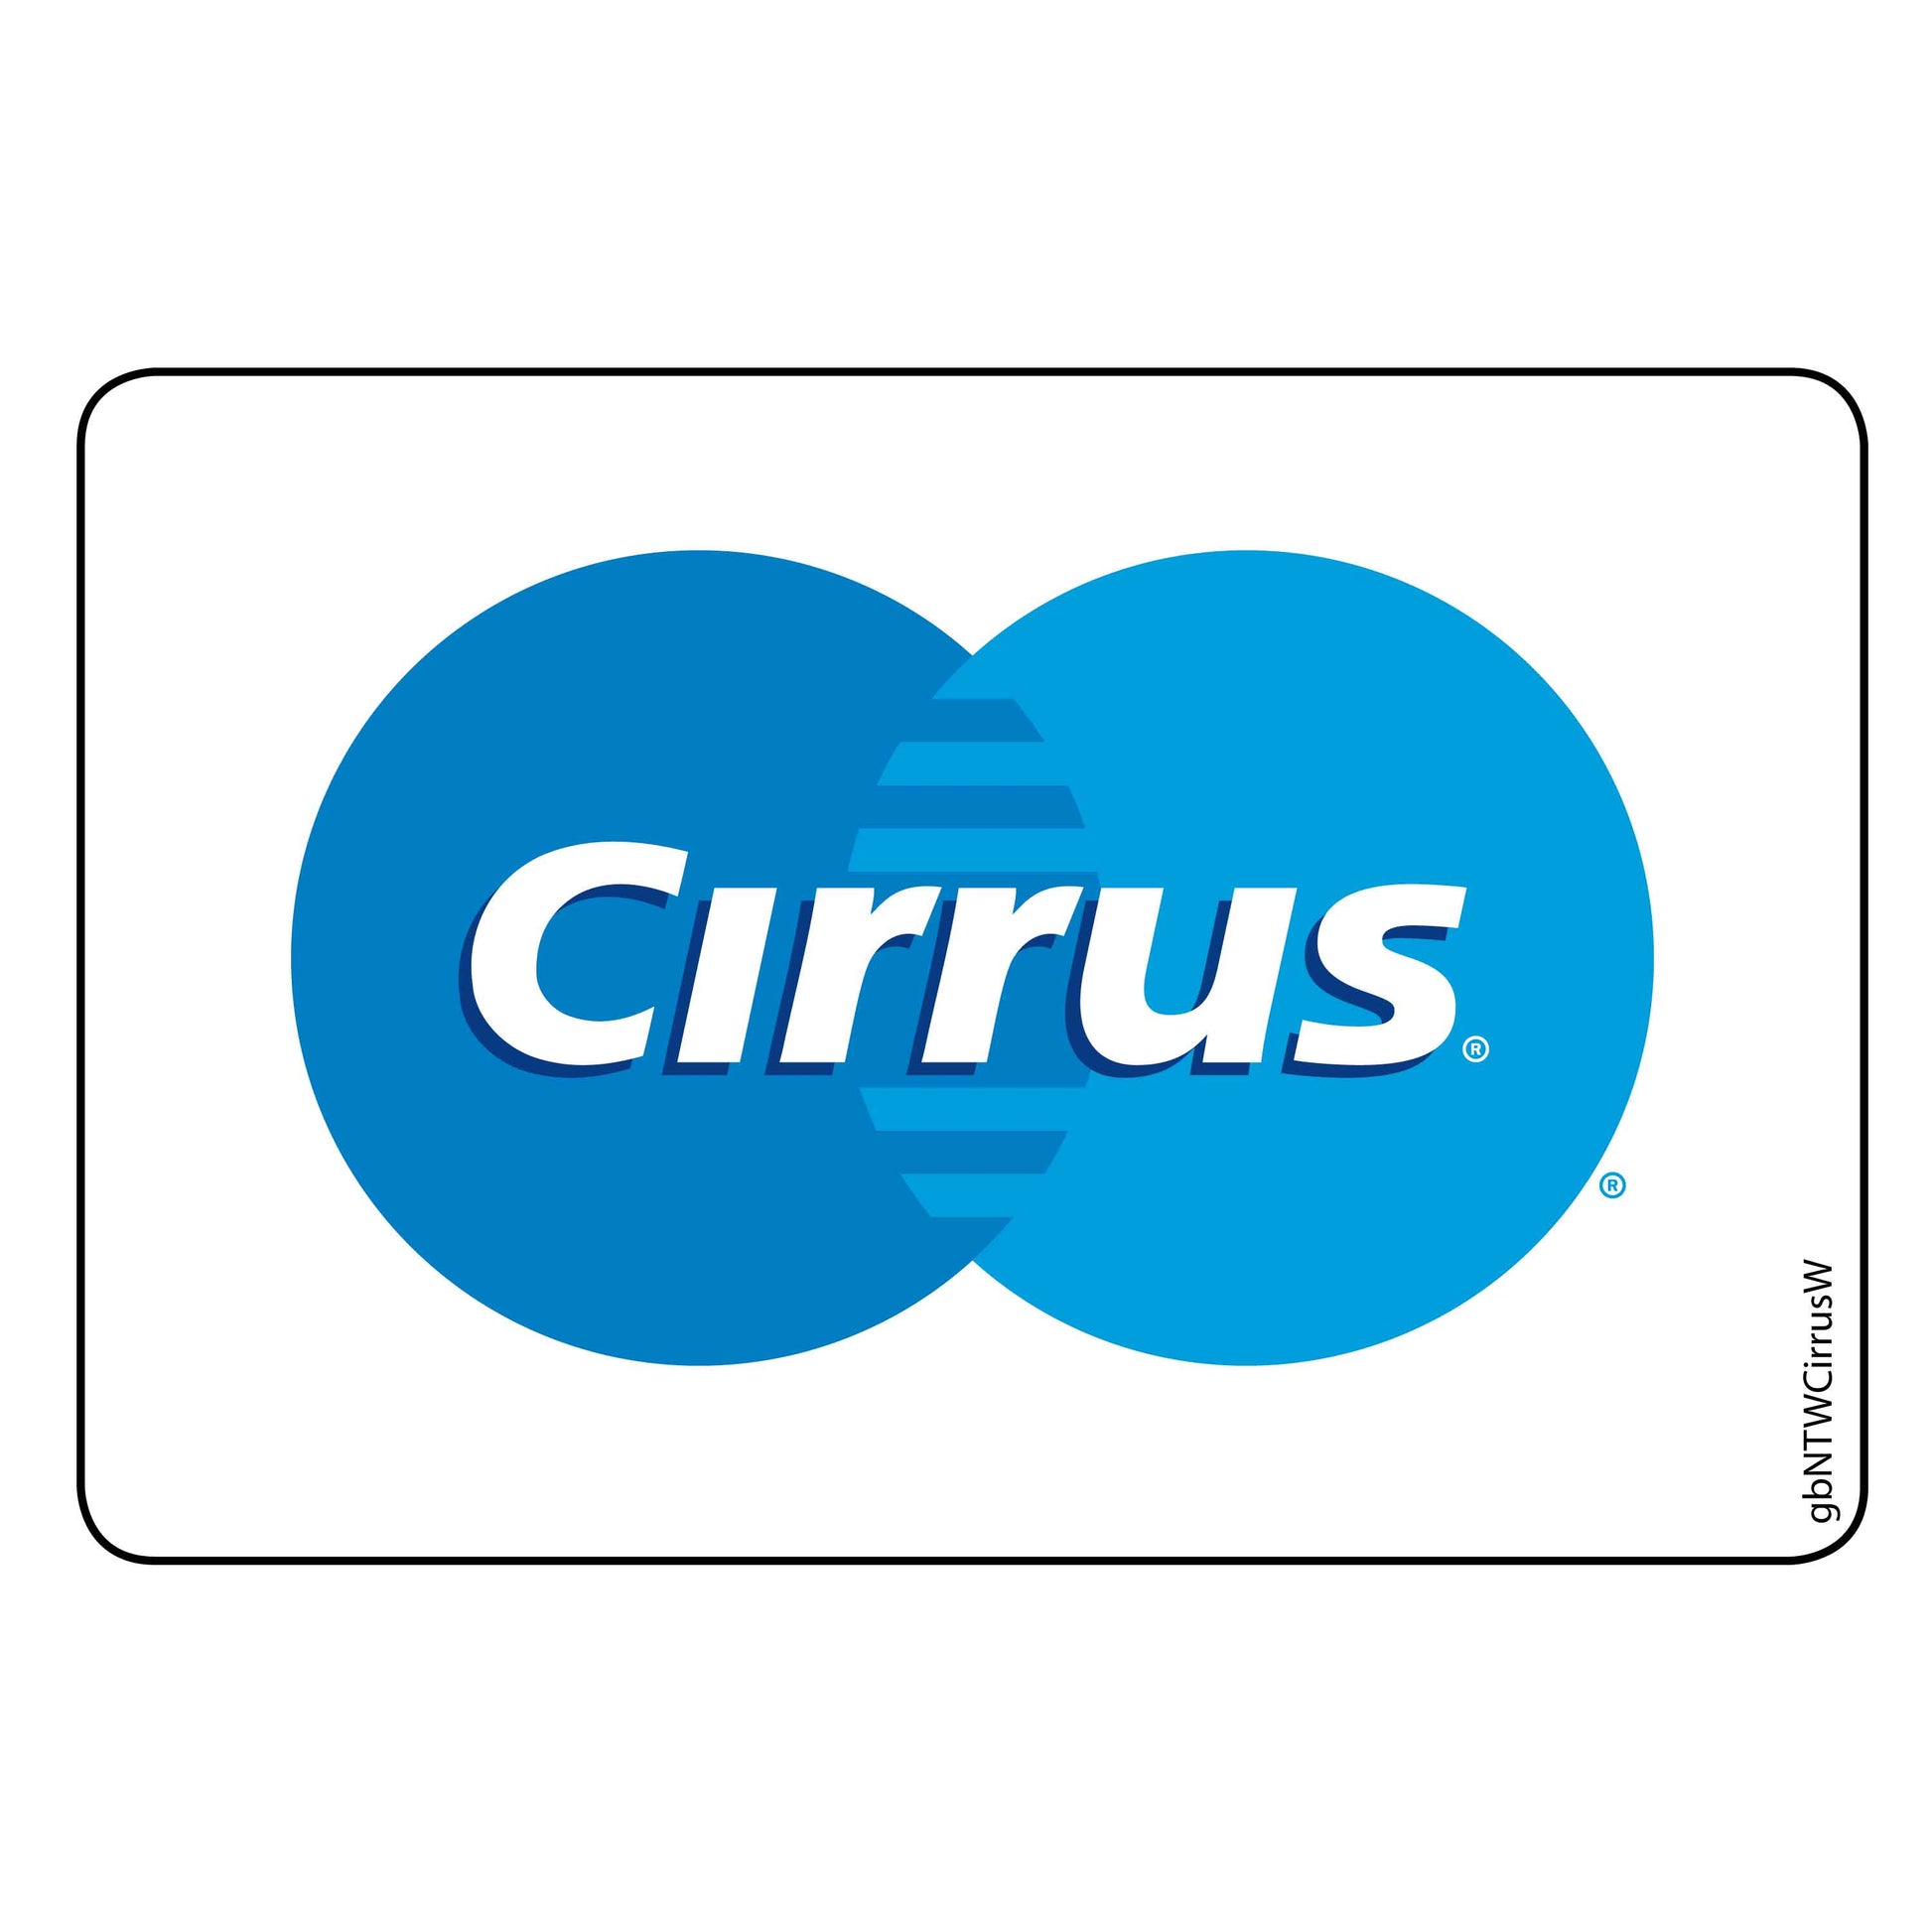 Single Network Decal, Cirrus Network. 3 inches by 2 inches in size.